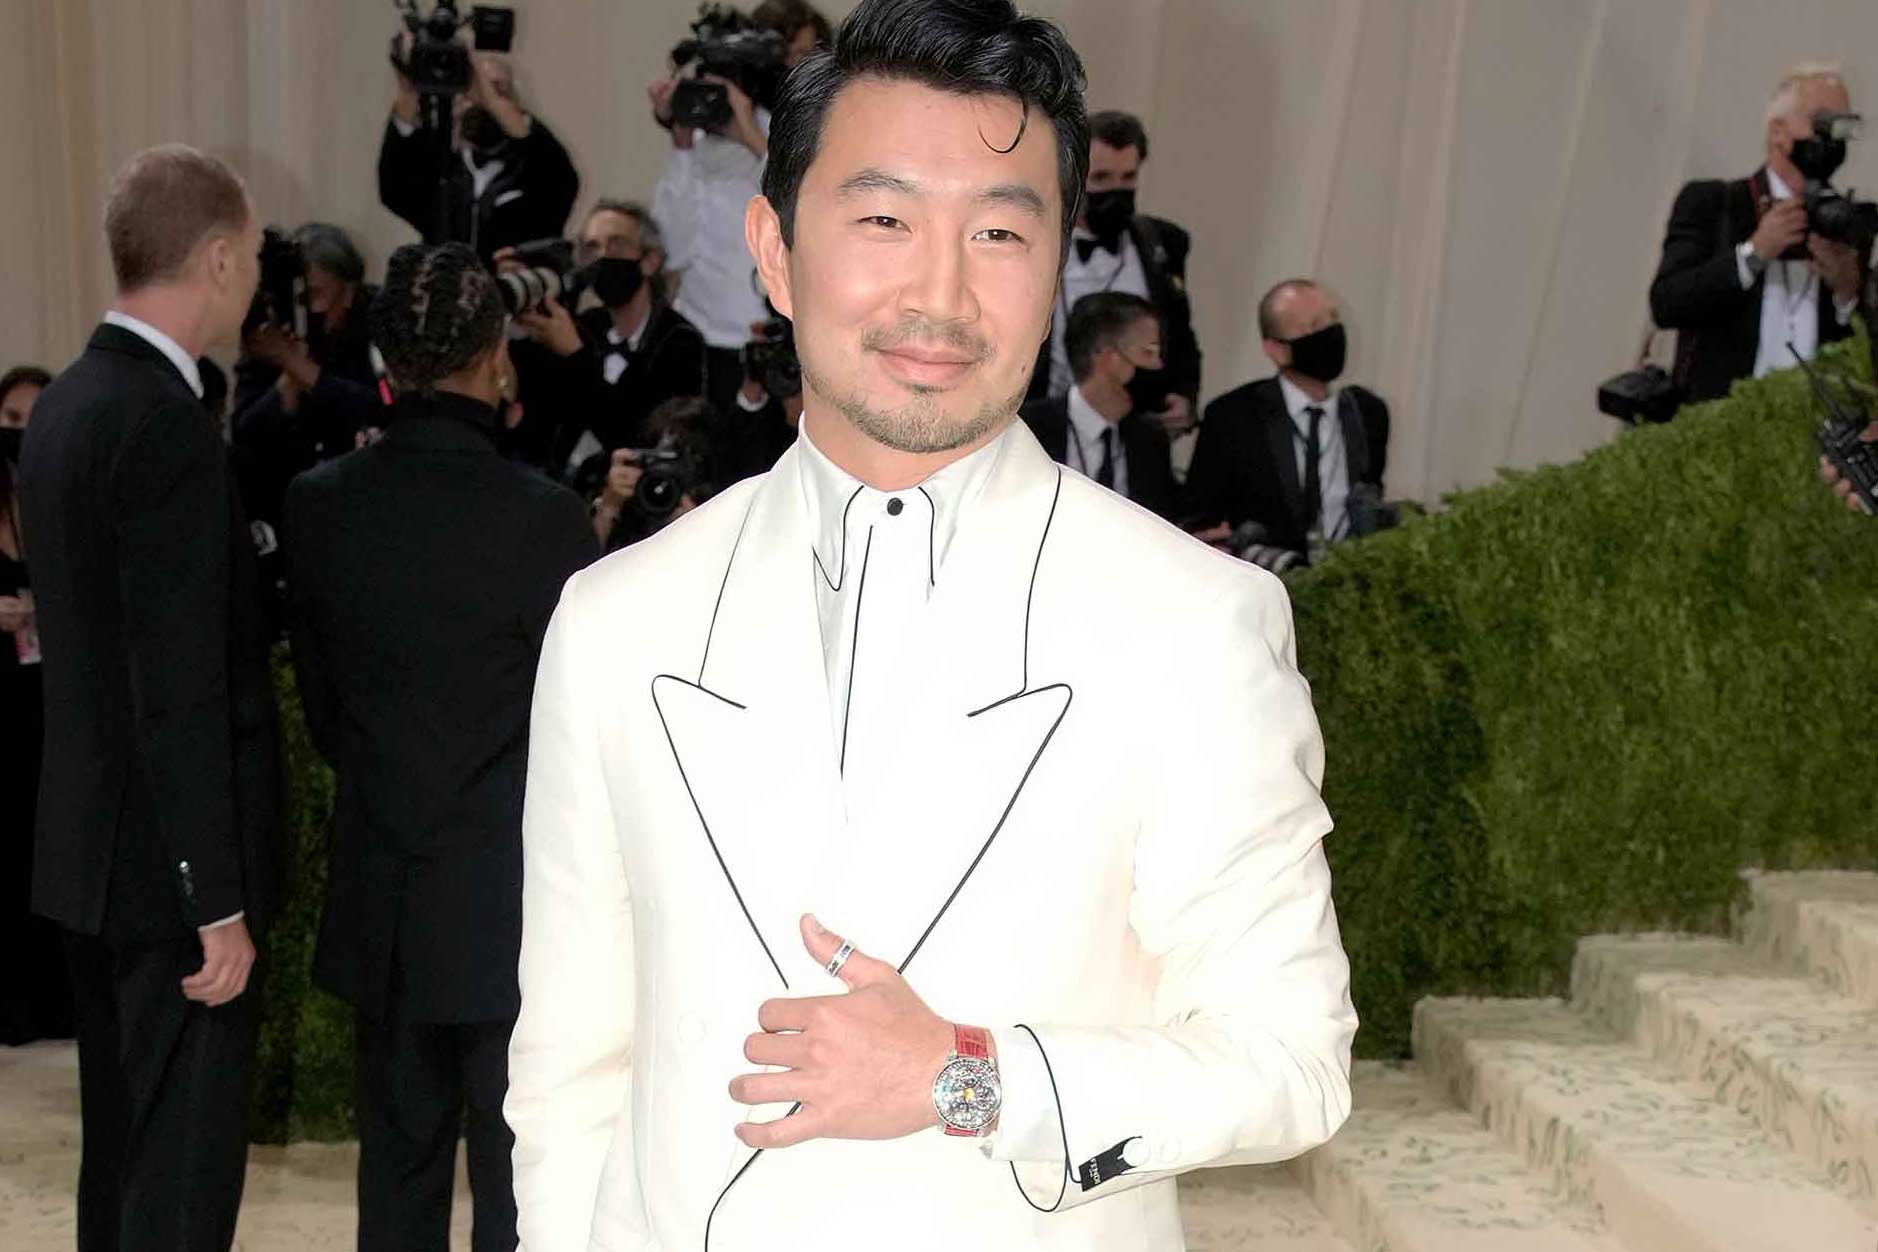 Marvel’s Shang Chi star Simu Liu made his Met Gala debut in Fendi and a version of the Jacob & Co. Astronomia on his wrist (Image: Getty)